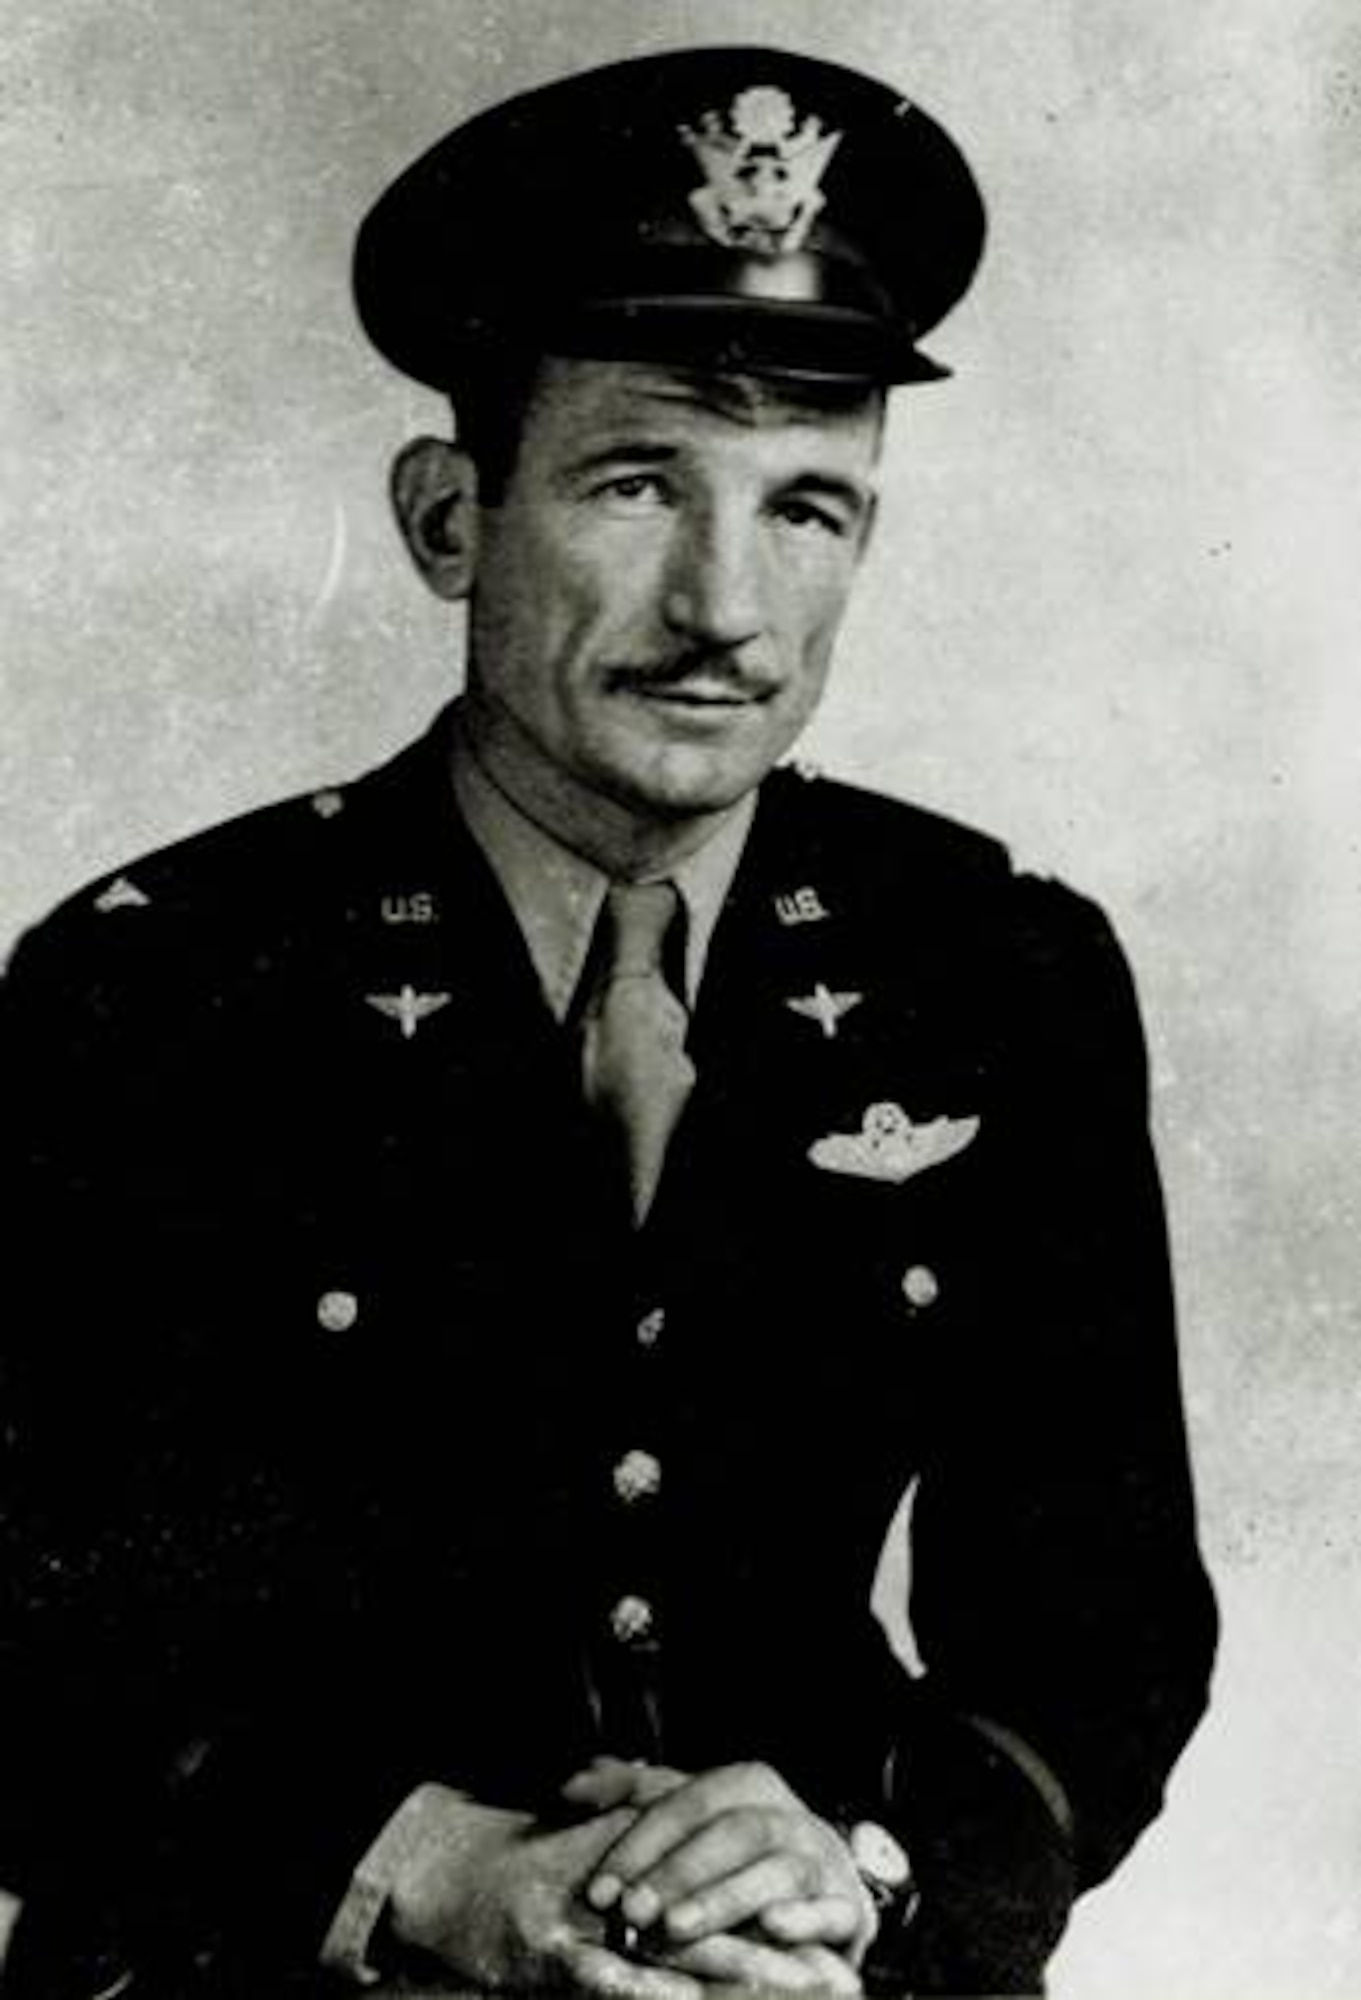 Col. Hamish McLelland, first commander of 315 Transport Group